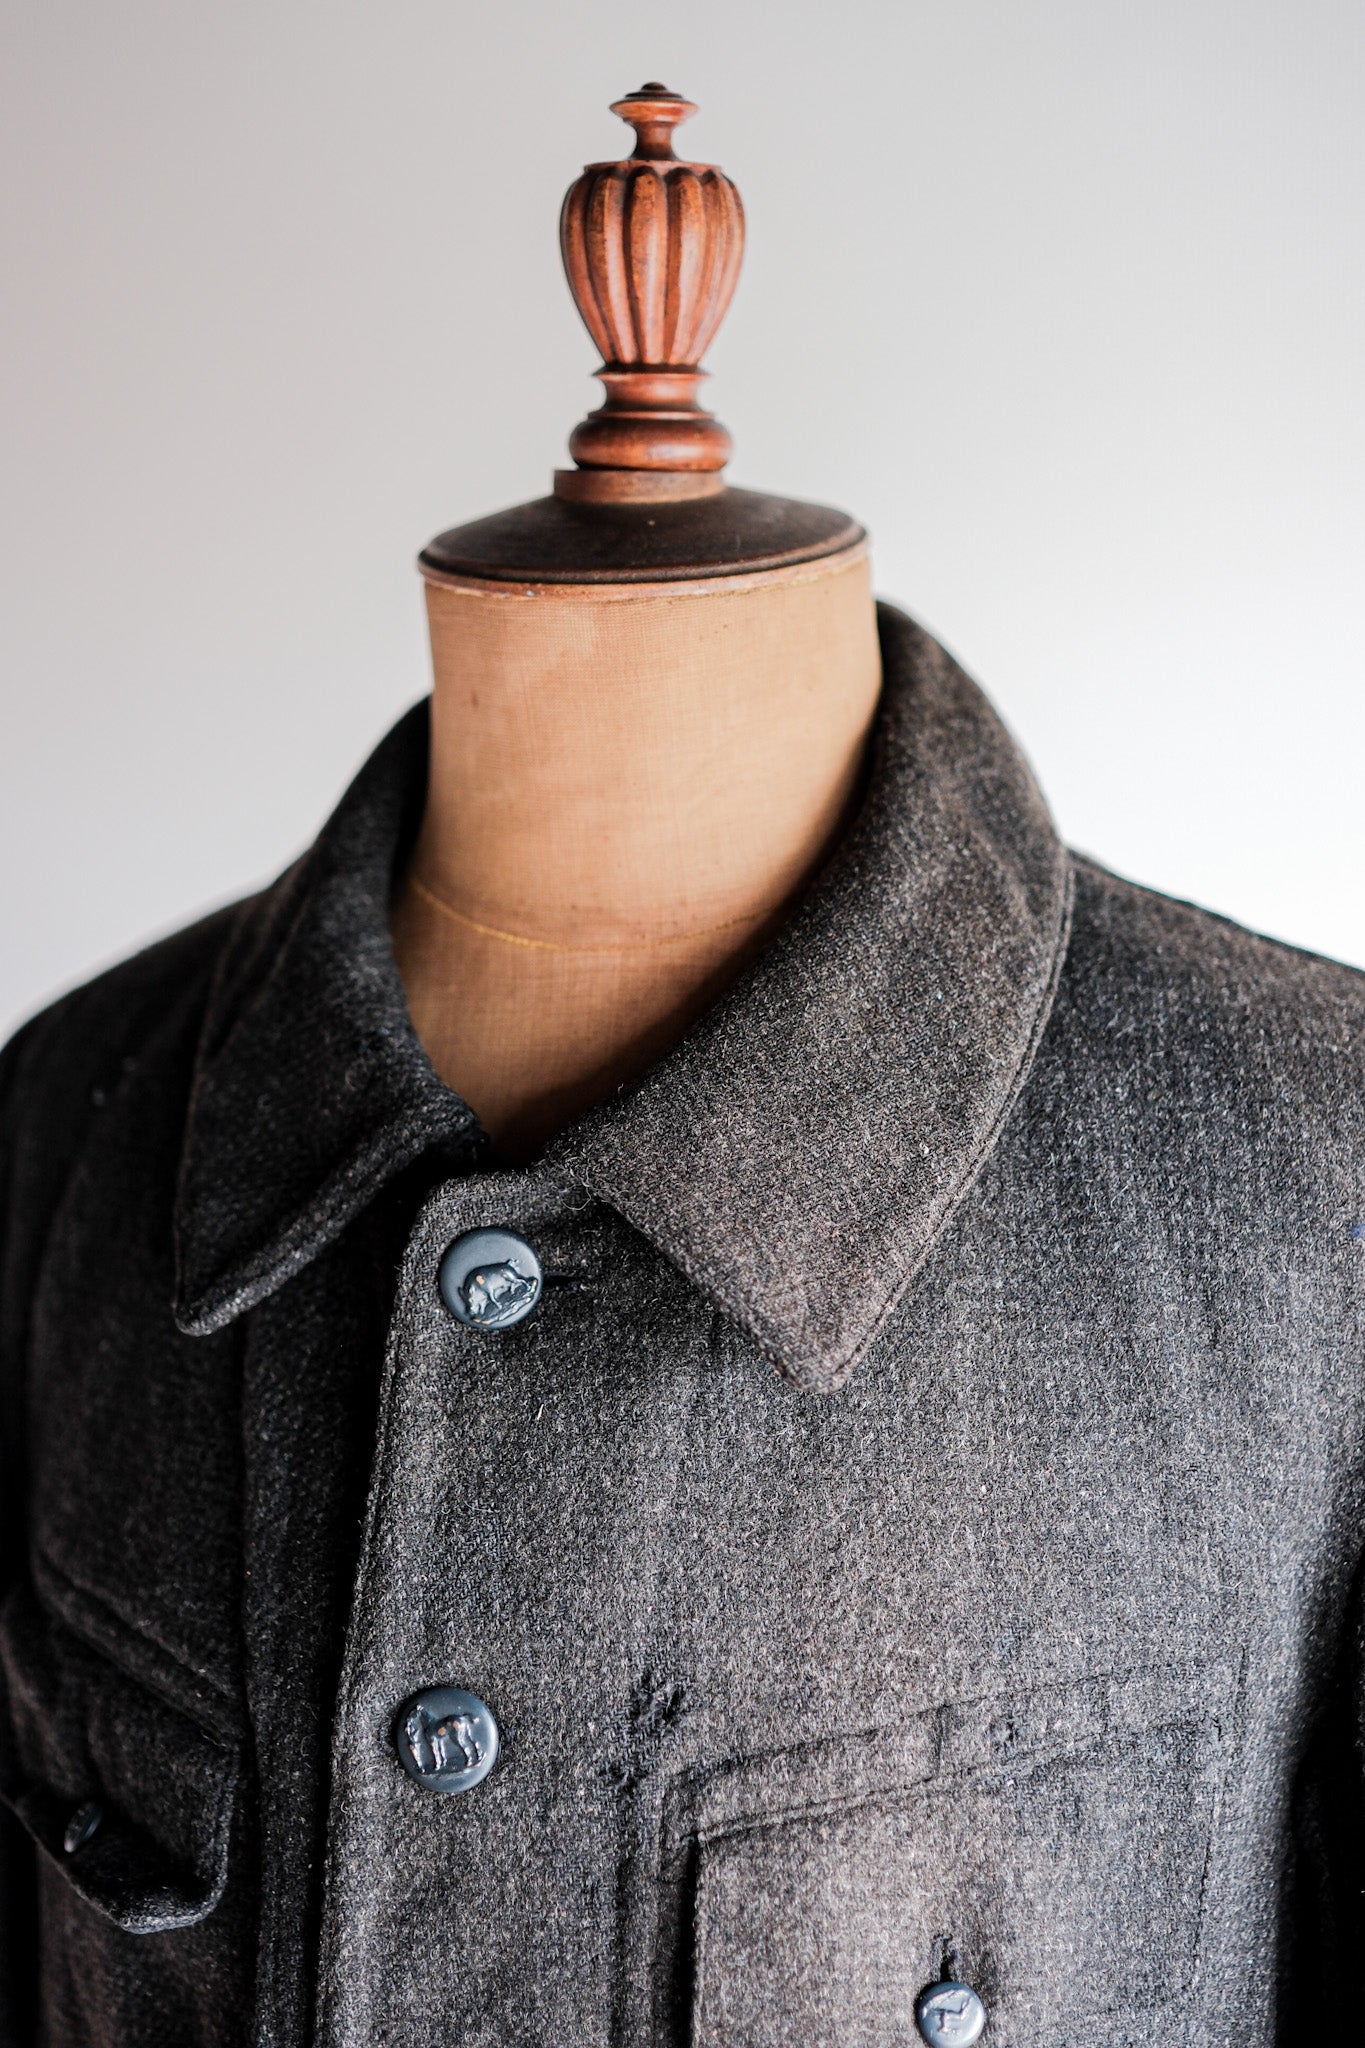 [~30's] French Vintage Grey Wool Hunting Jacket With Chin Strap "Boro"